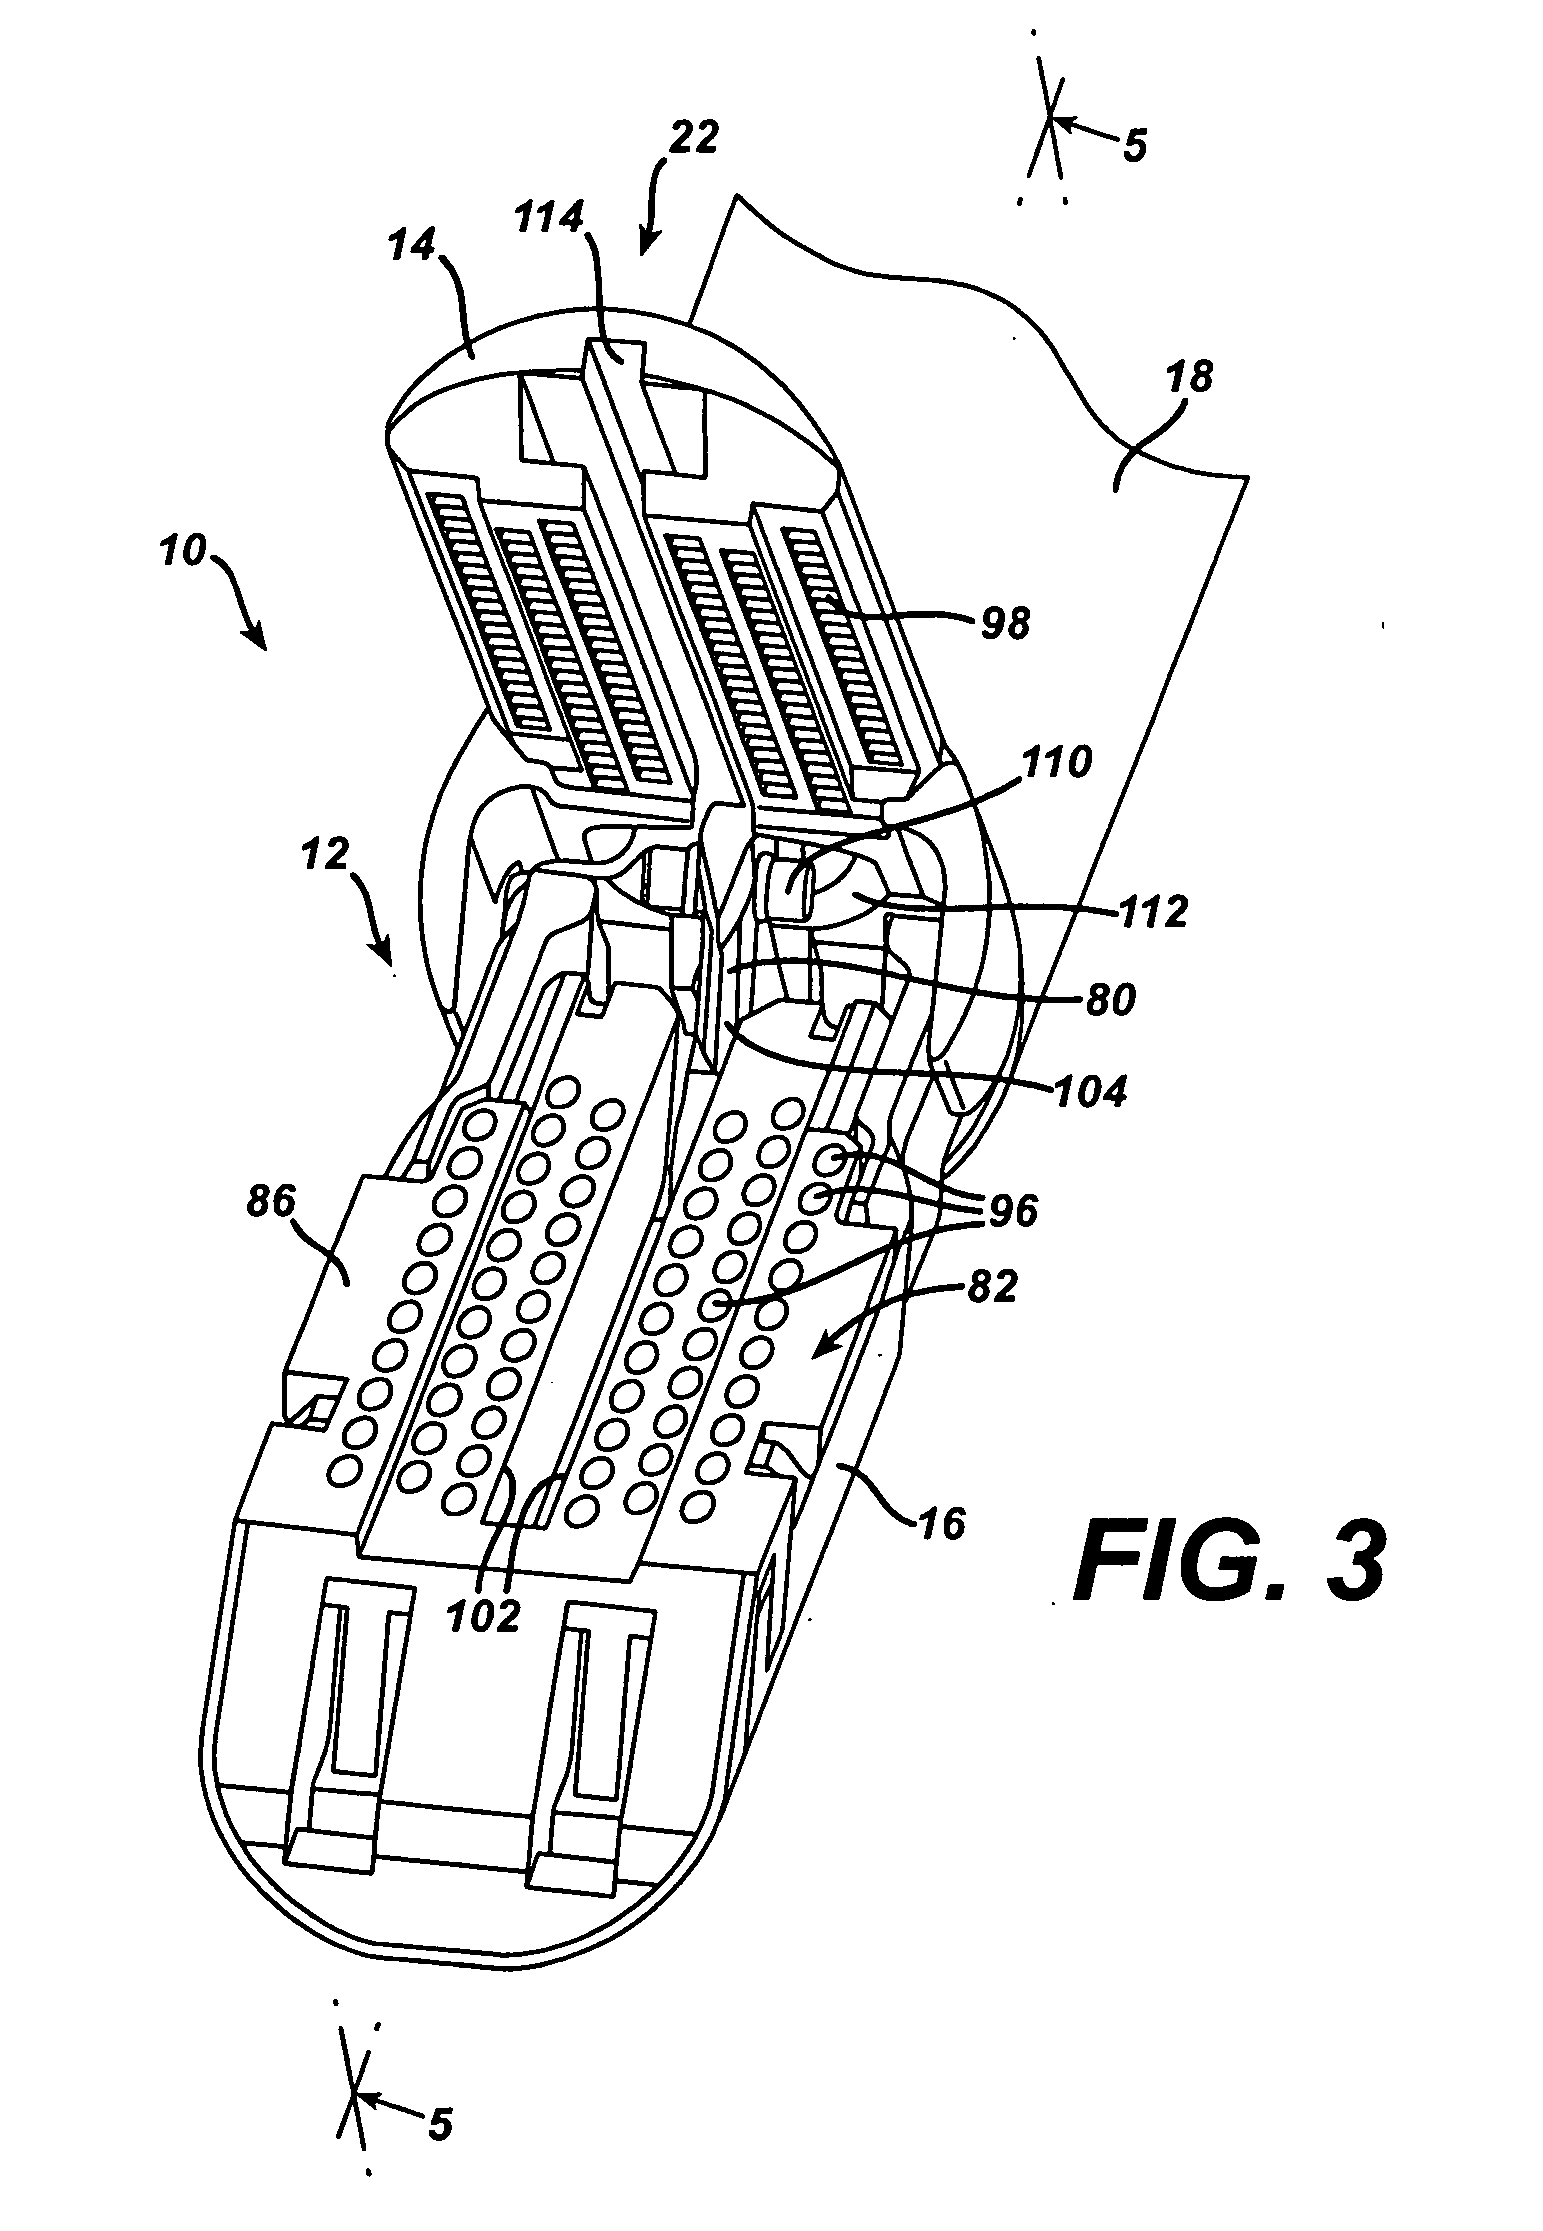 Surgical stapling instrument incorporating a firing mechanism having a linked rack transmission